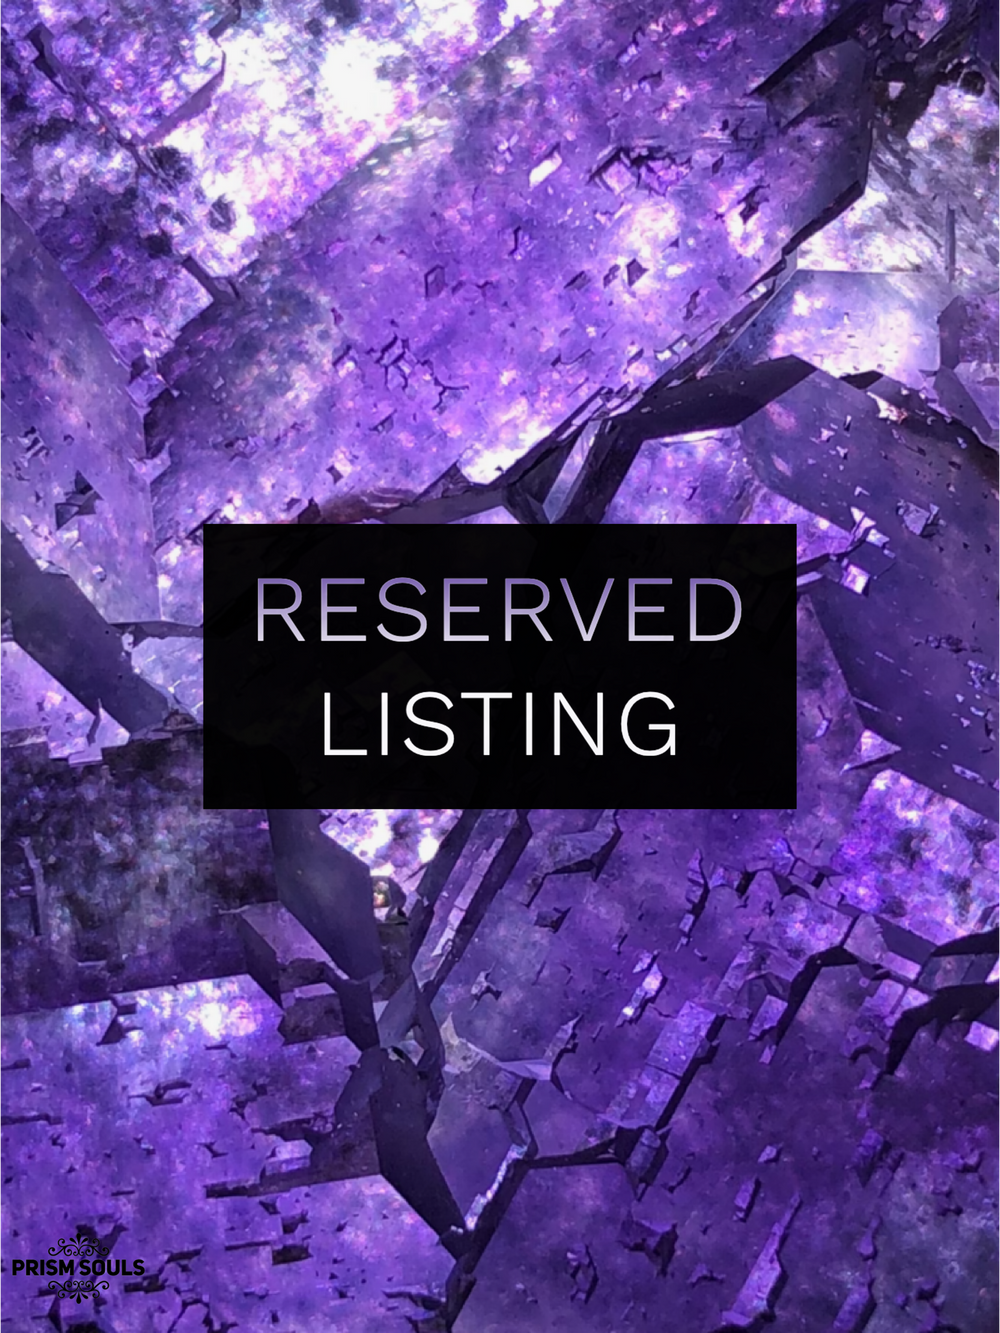 RESERVED LISTING - moverlee